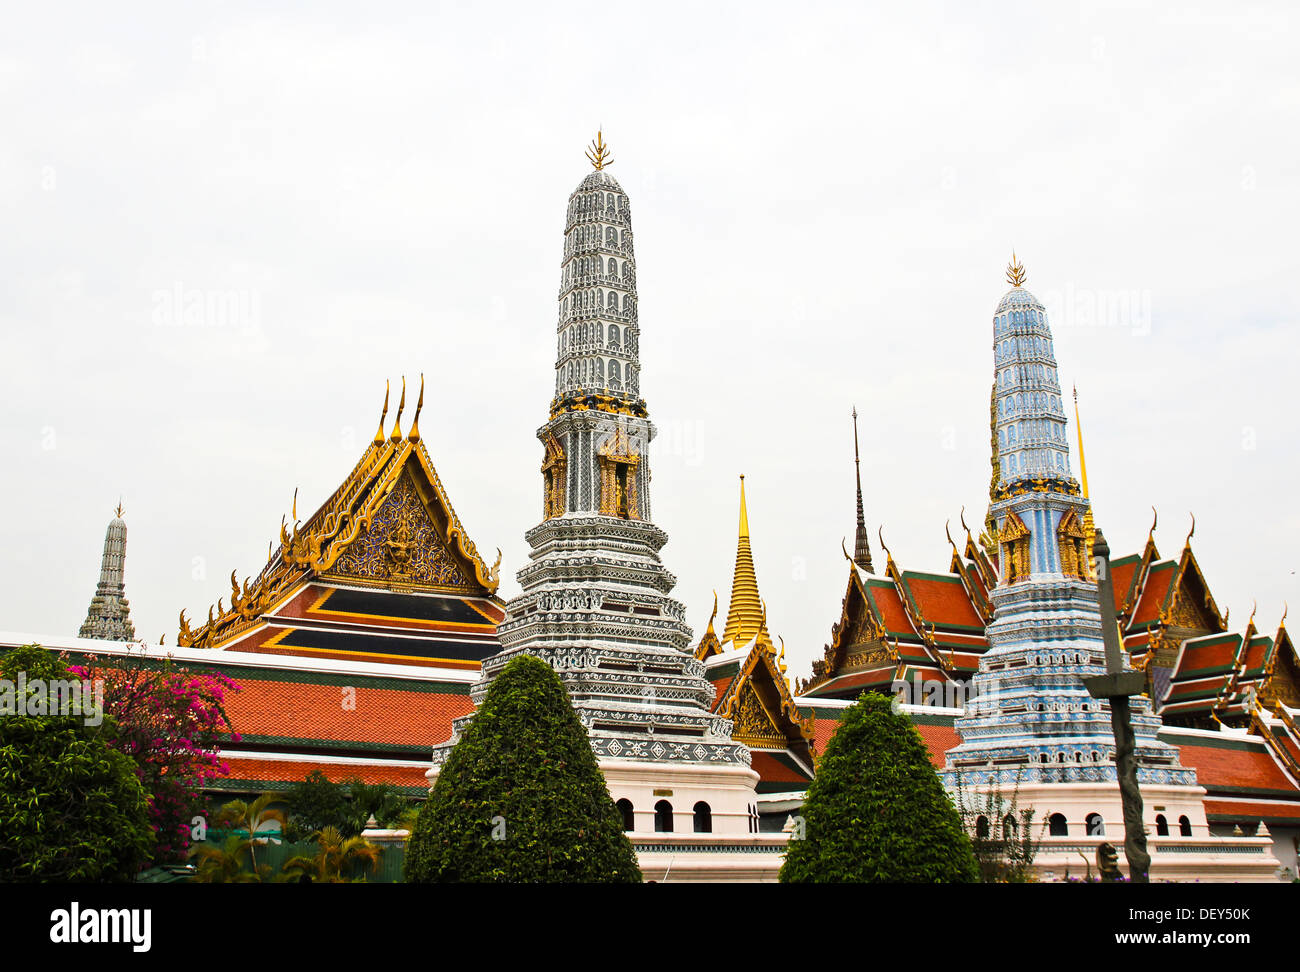 Grand Palace, the major tourism attraction in Bangkok, Thailand. Stock Photo